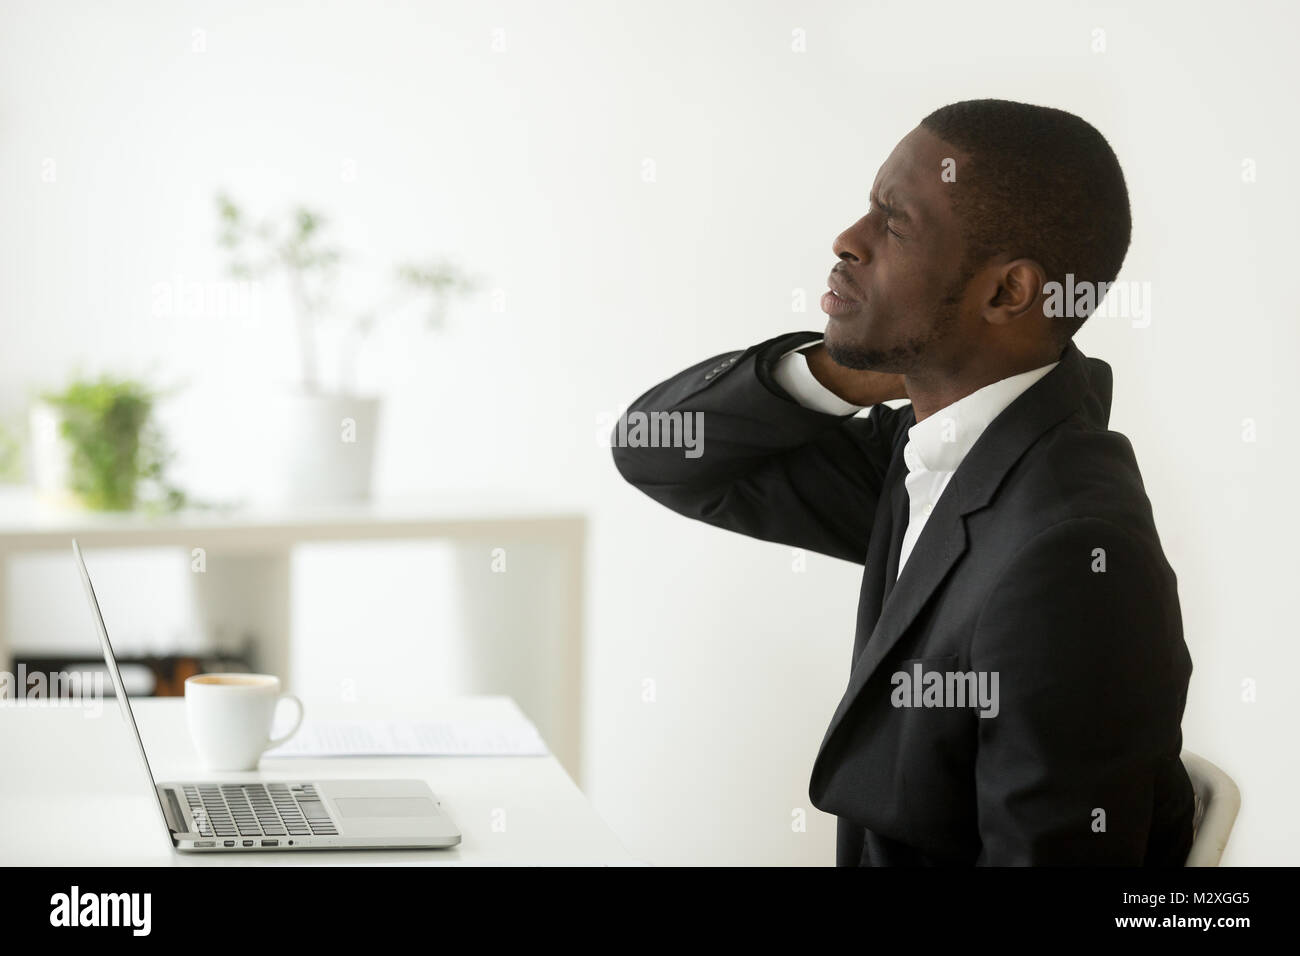 African american businessman feels neck pain sitting on uncomfortable office chair at work, black man having computer syndrome suffering from stiff ne Stock Photo